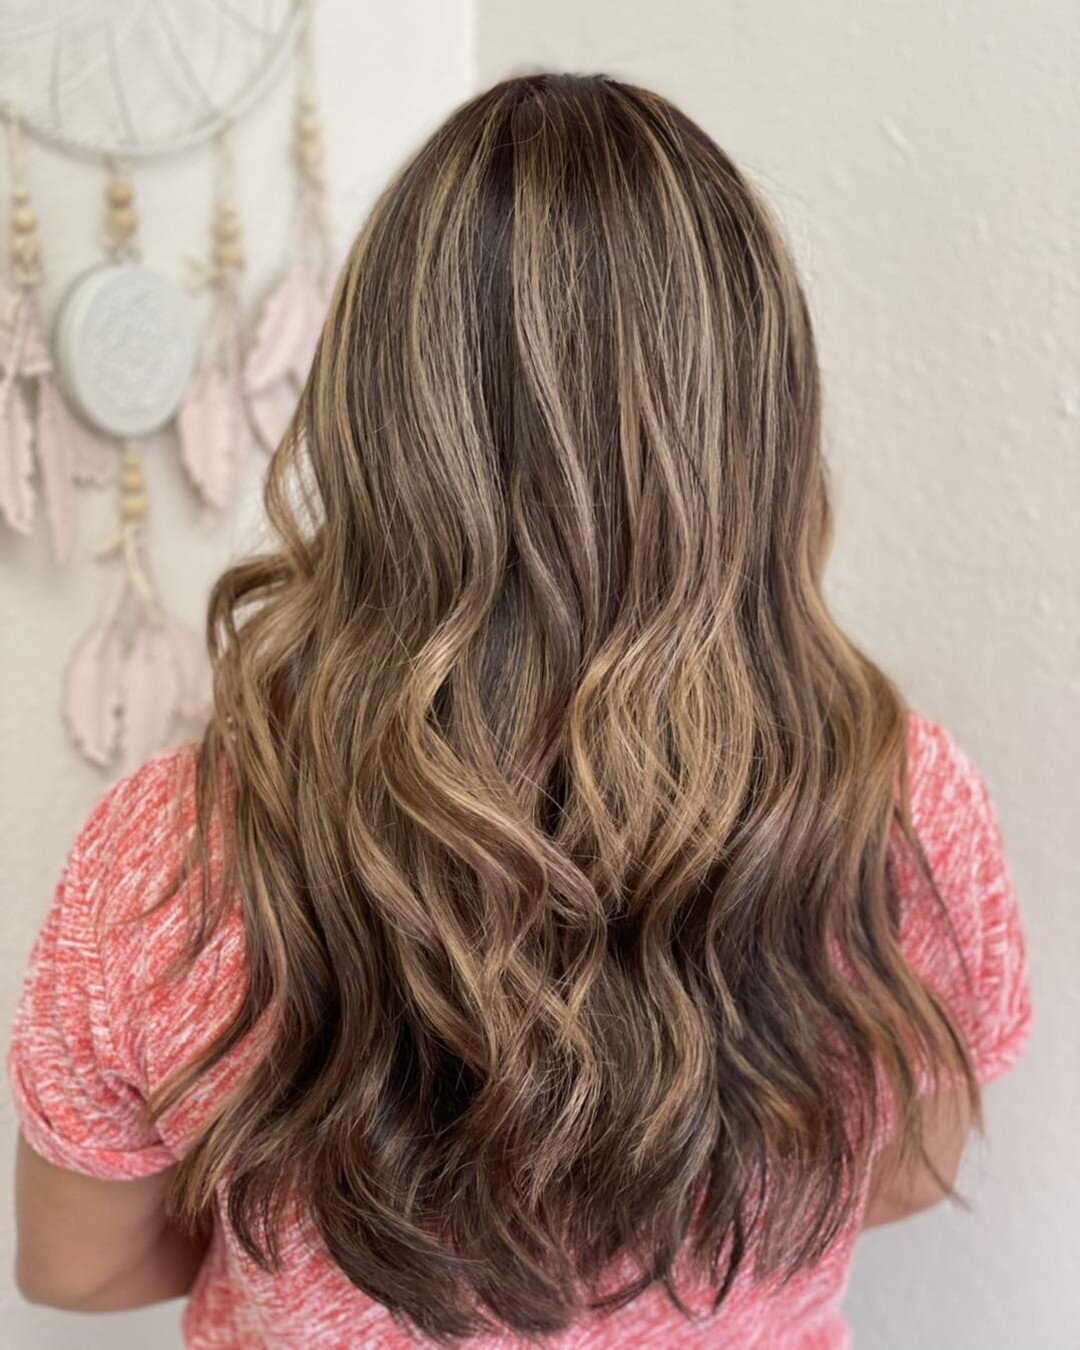 We ❤️ balayage! It&rsquo;s always balayage season- low maintenance and oh so fabulous! 📱 Book yours today 😉 
⭐️ Balayage, haircut and style by Olivia. #lookgoodfeelgorgeous
#modesalon #arlingtontx #teammode #modehairsalon #teammodehair #mode #hairs